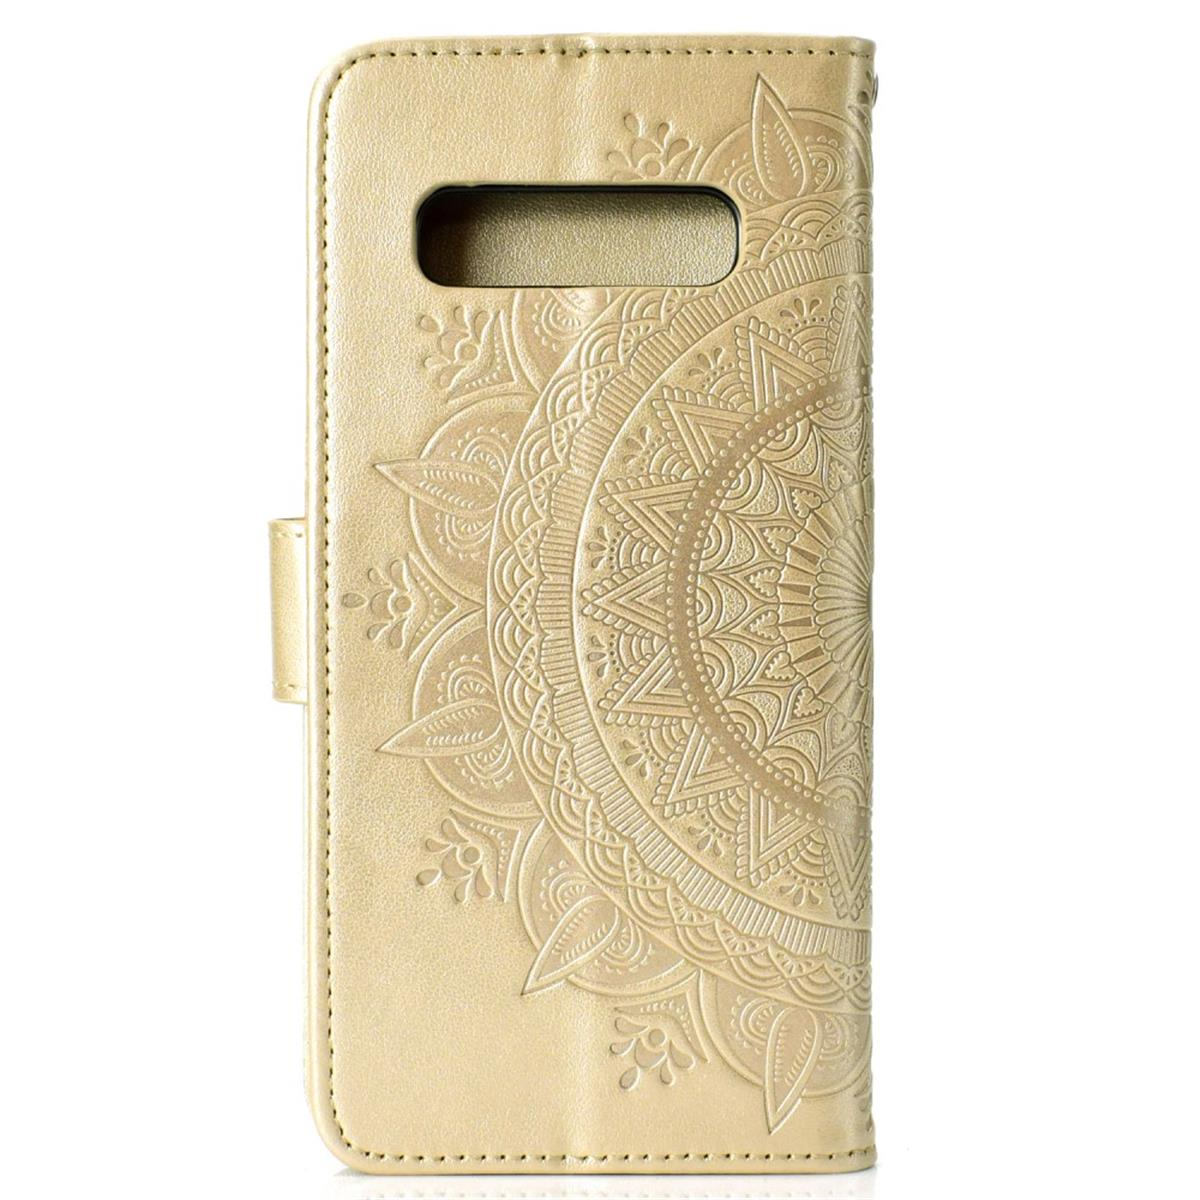 COVERKINGZ Klapphülle mit Mandala Galaxy Muster, Bookcover, Samsung, [Plus], Gold S10